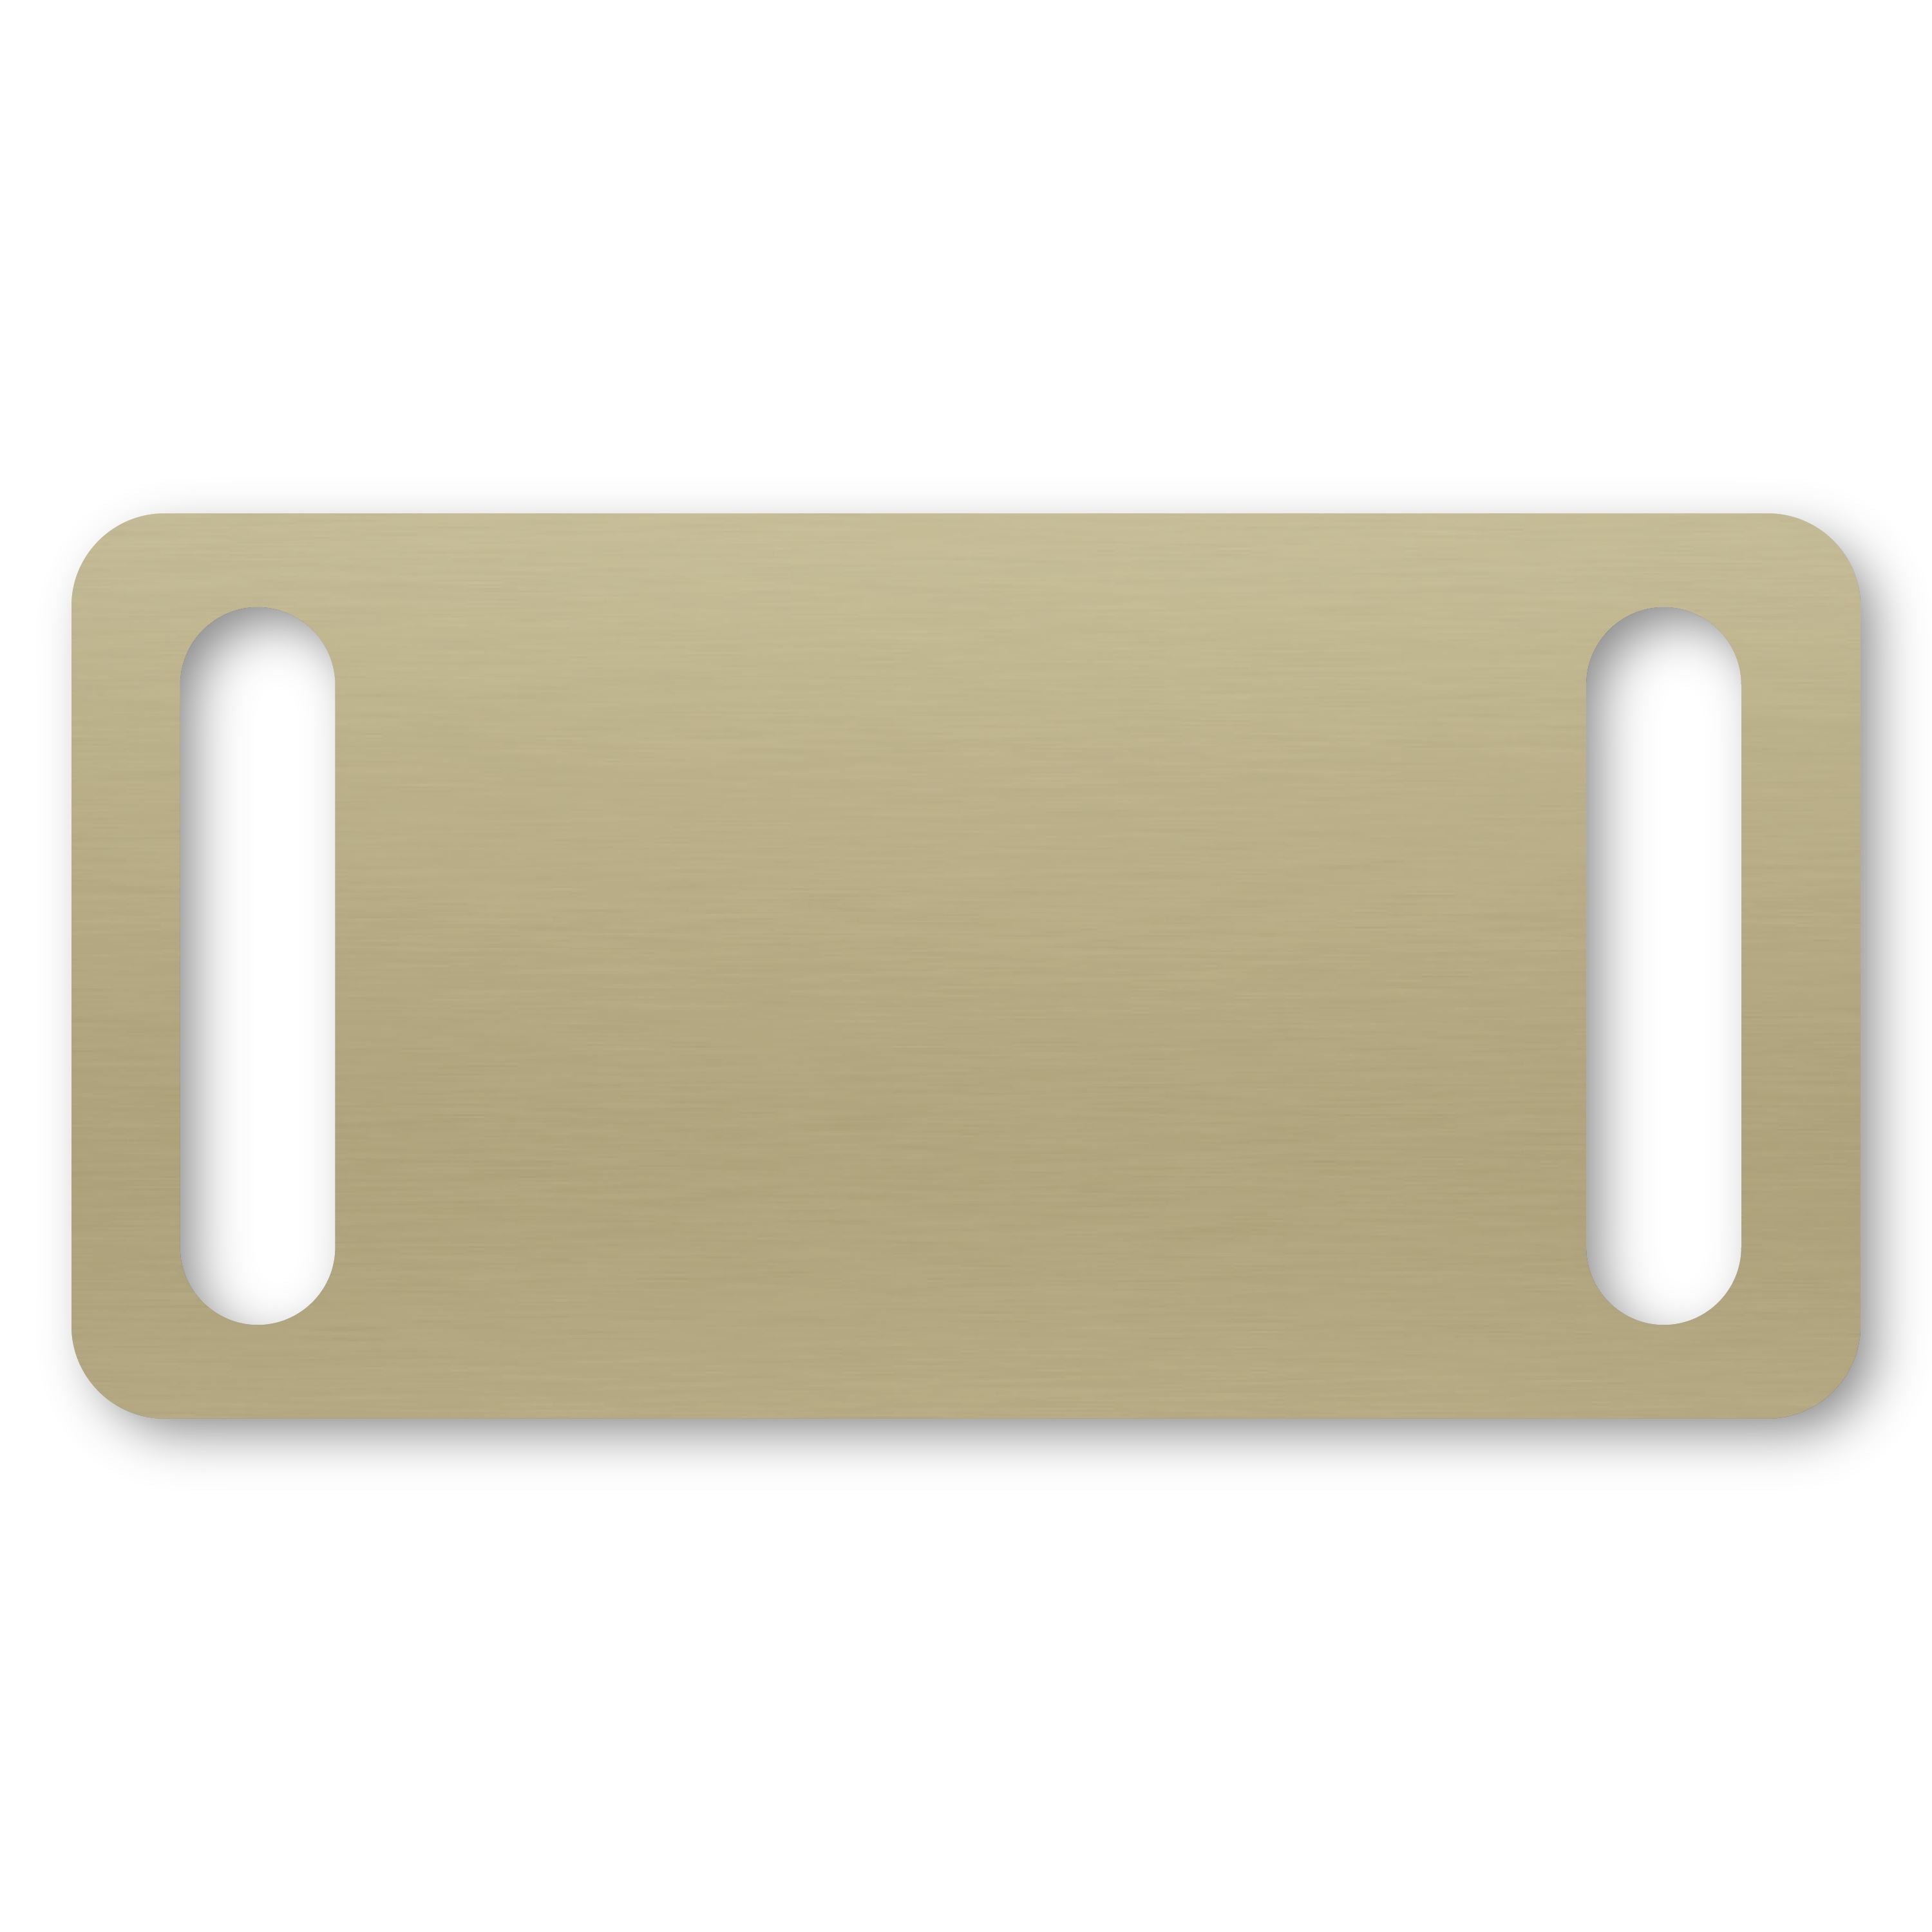 Anodized Aluminum Rectangle Slide-On Tags, 1-3/16" x 2" with 1/4" x 1" Slot, Laser Engraved Metal Tags Craftworks NW Gold 